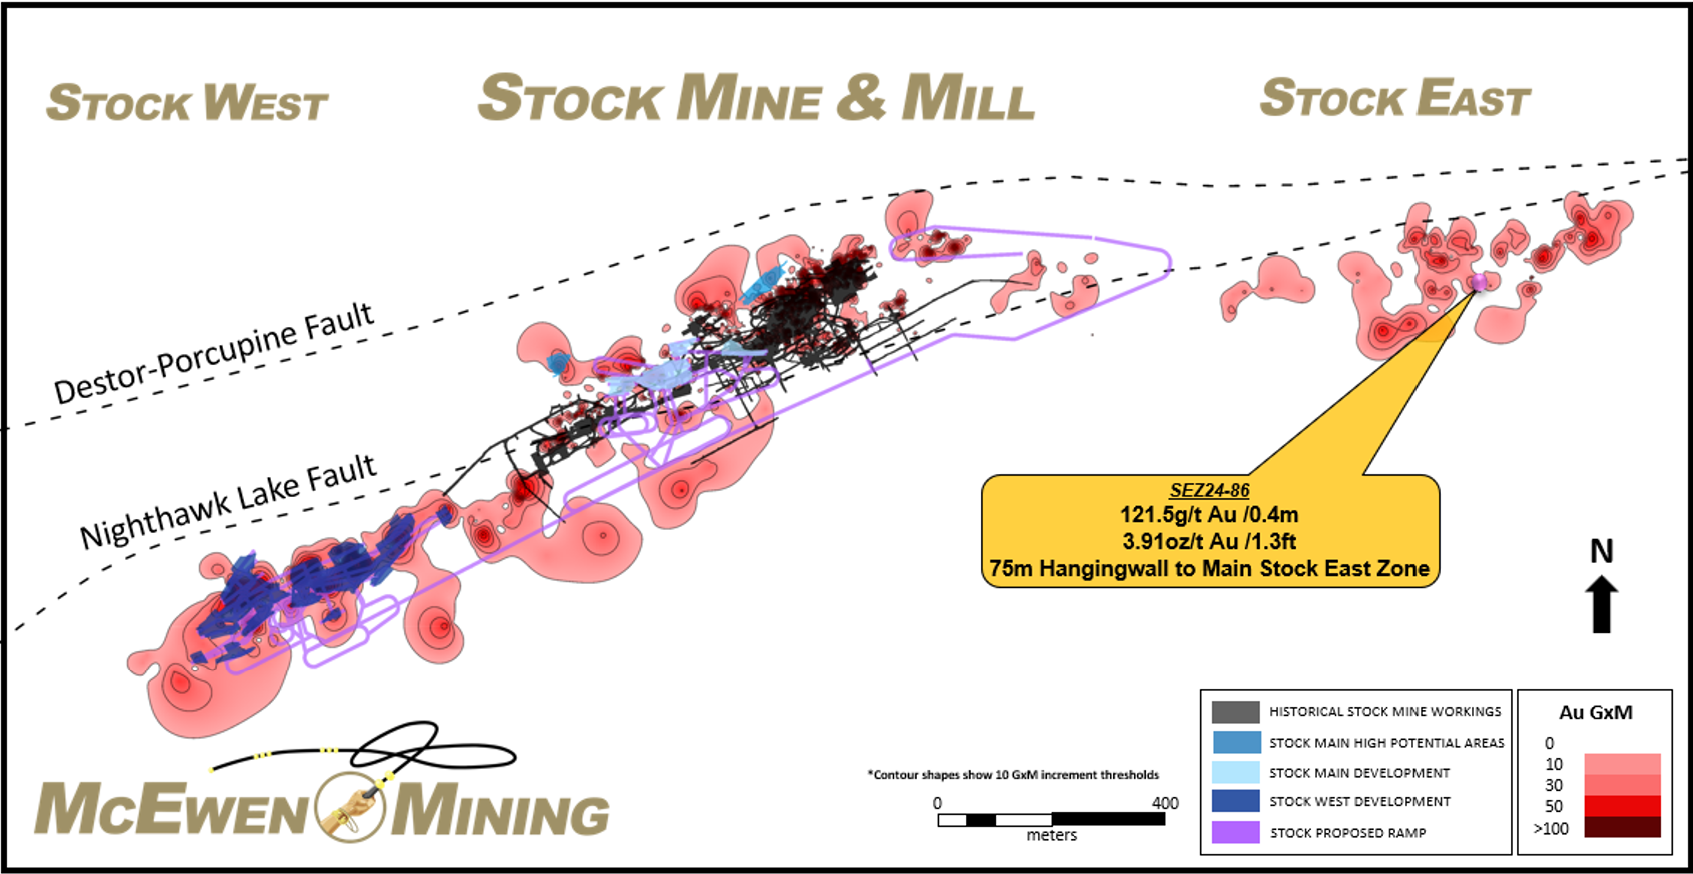 Figure 2 - Plan view of the mineralization seen on the Stock property